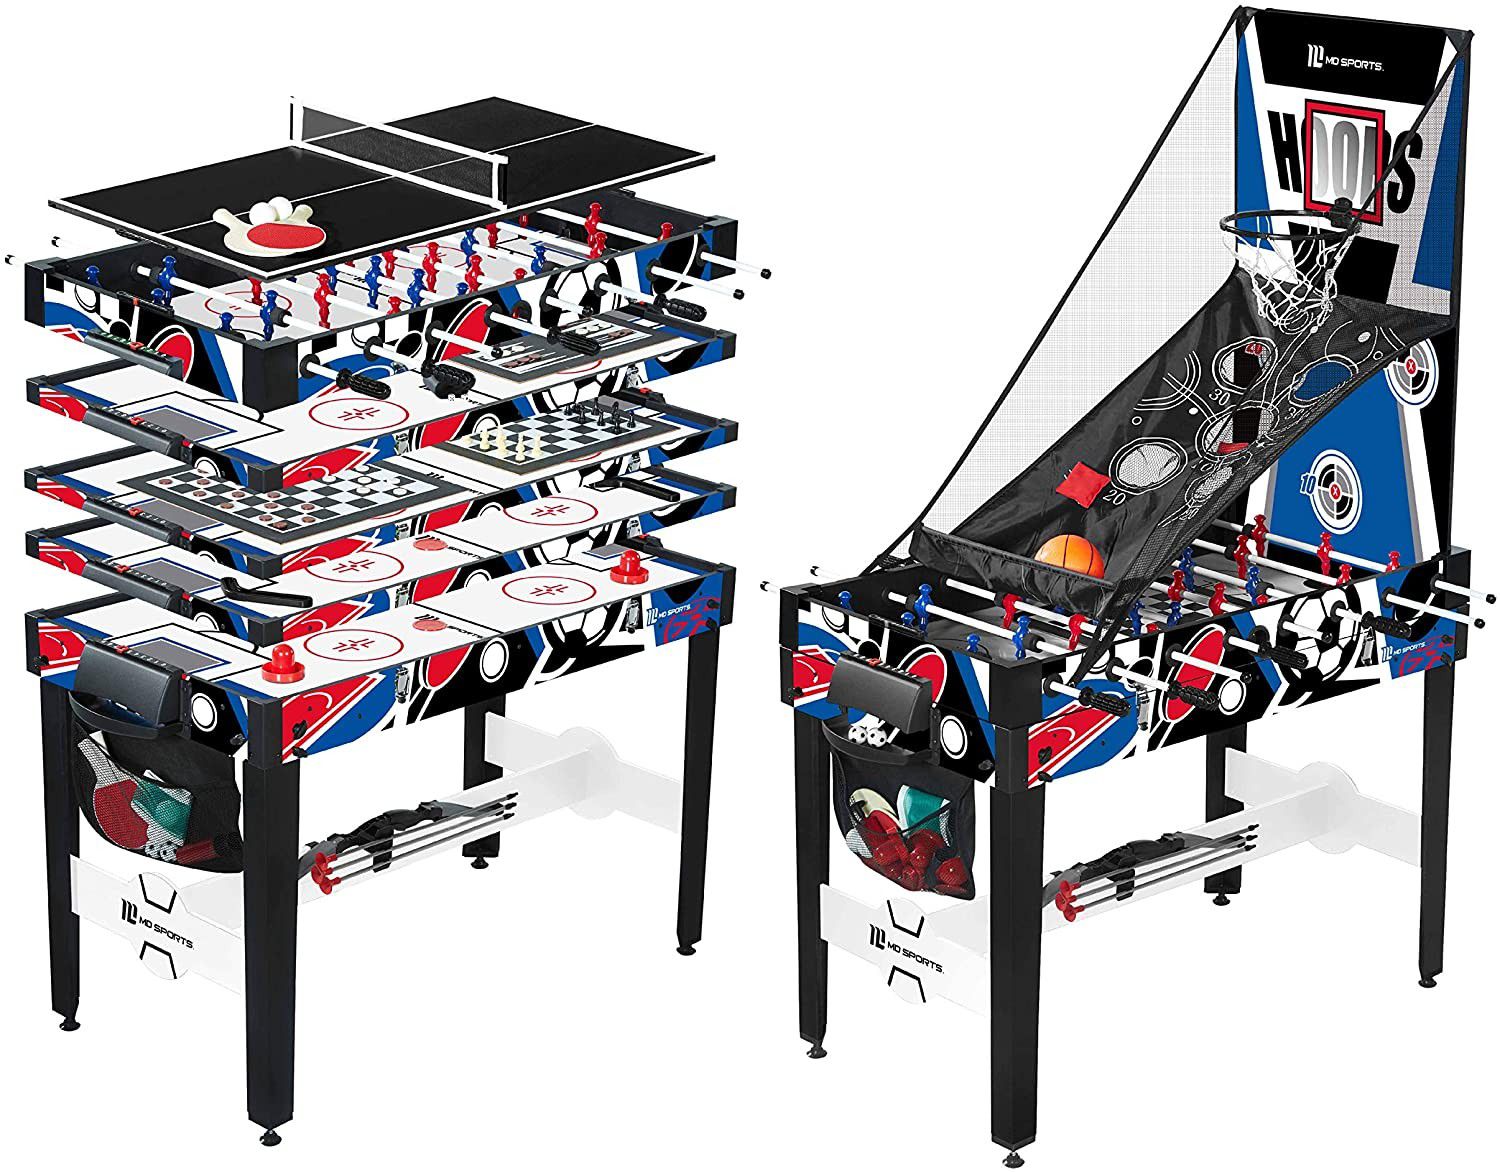 48" Multi Game Combination Table Set for Kids and Adults